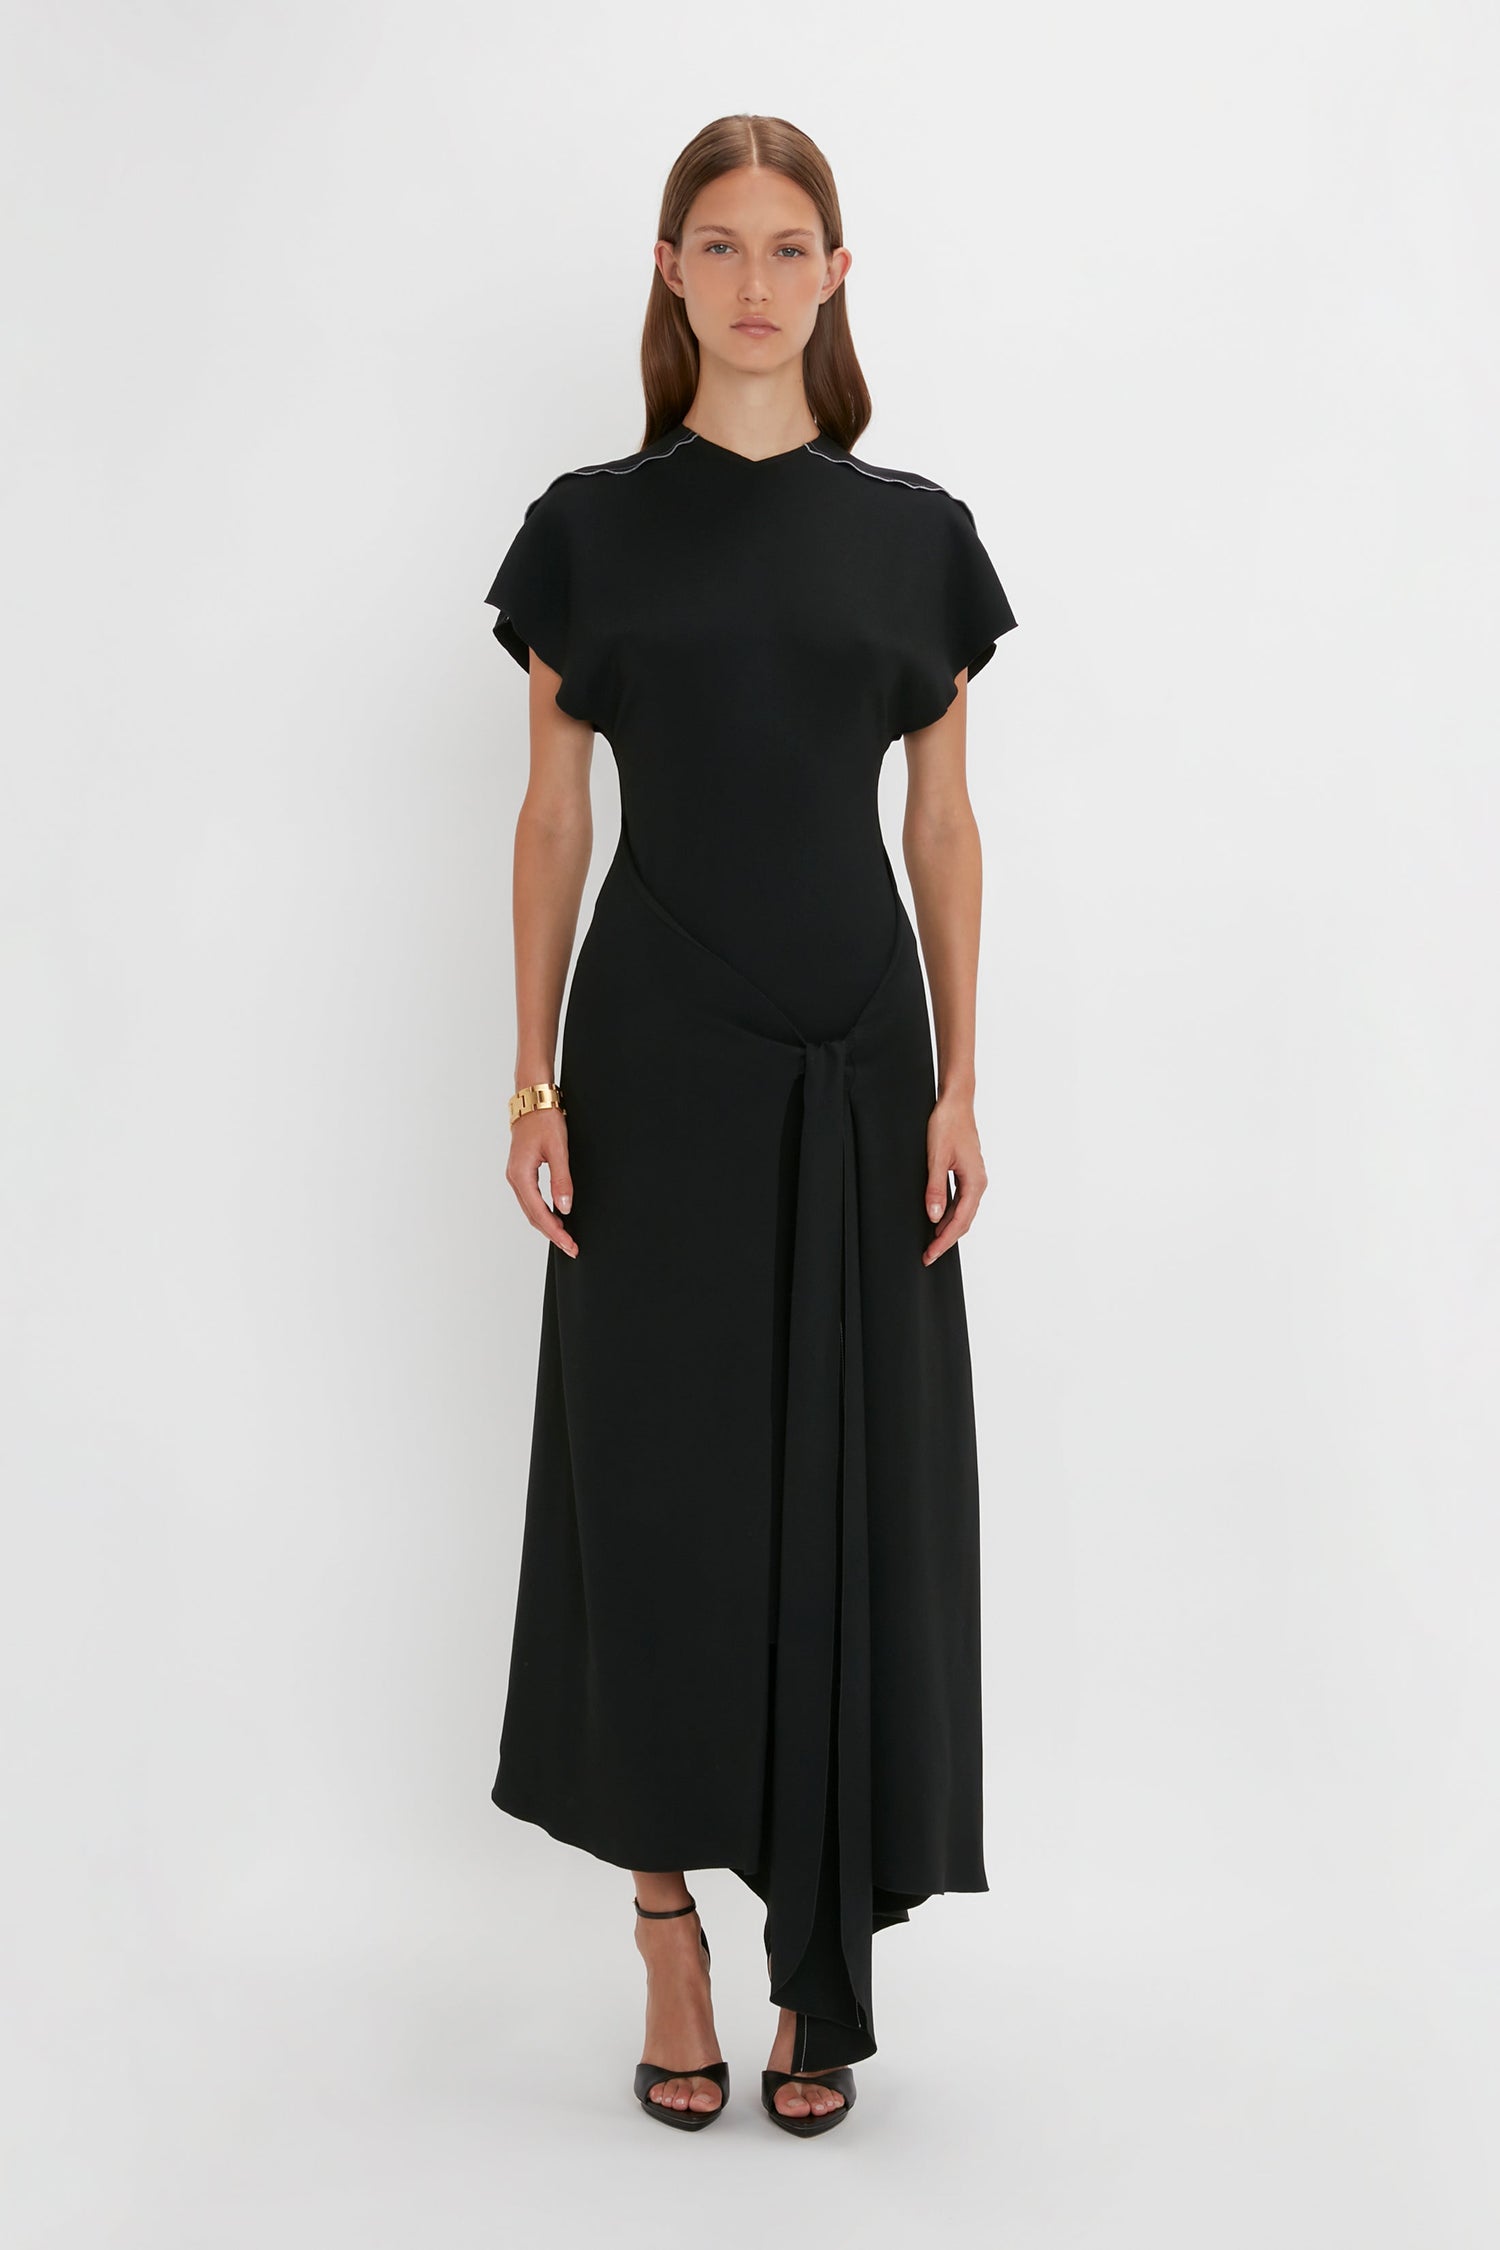 A woman wearing a sophisticated crew-neck black Short Sleeve Tie Detail Dress In Black by Victoria Beckham, standing against a plain white background.